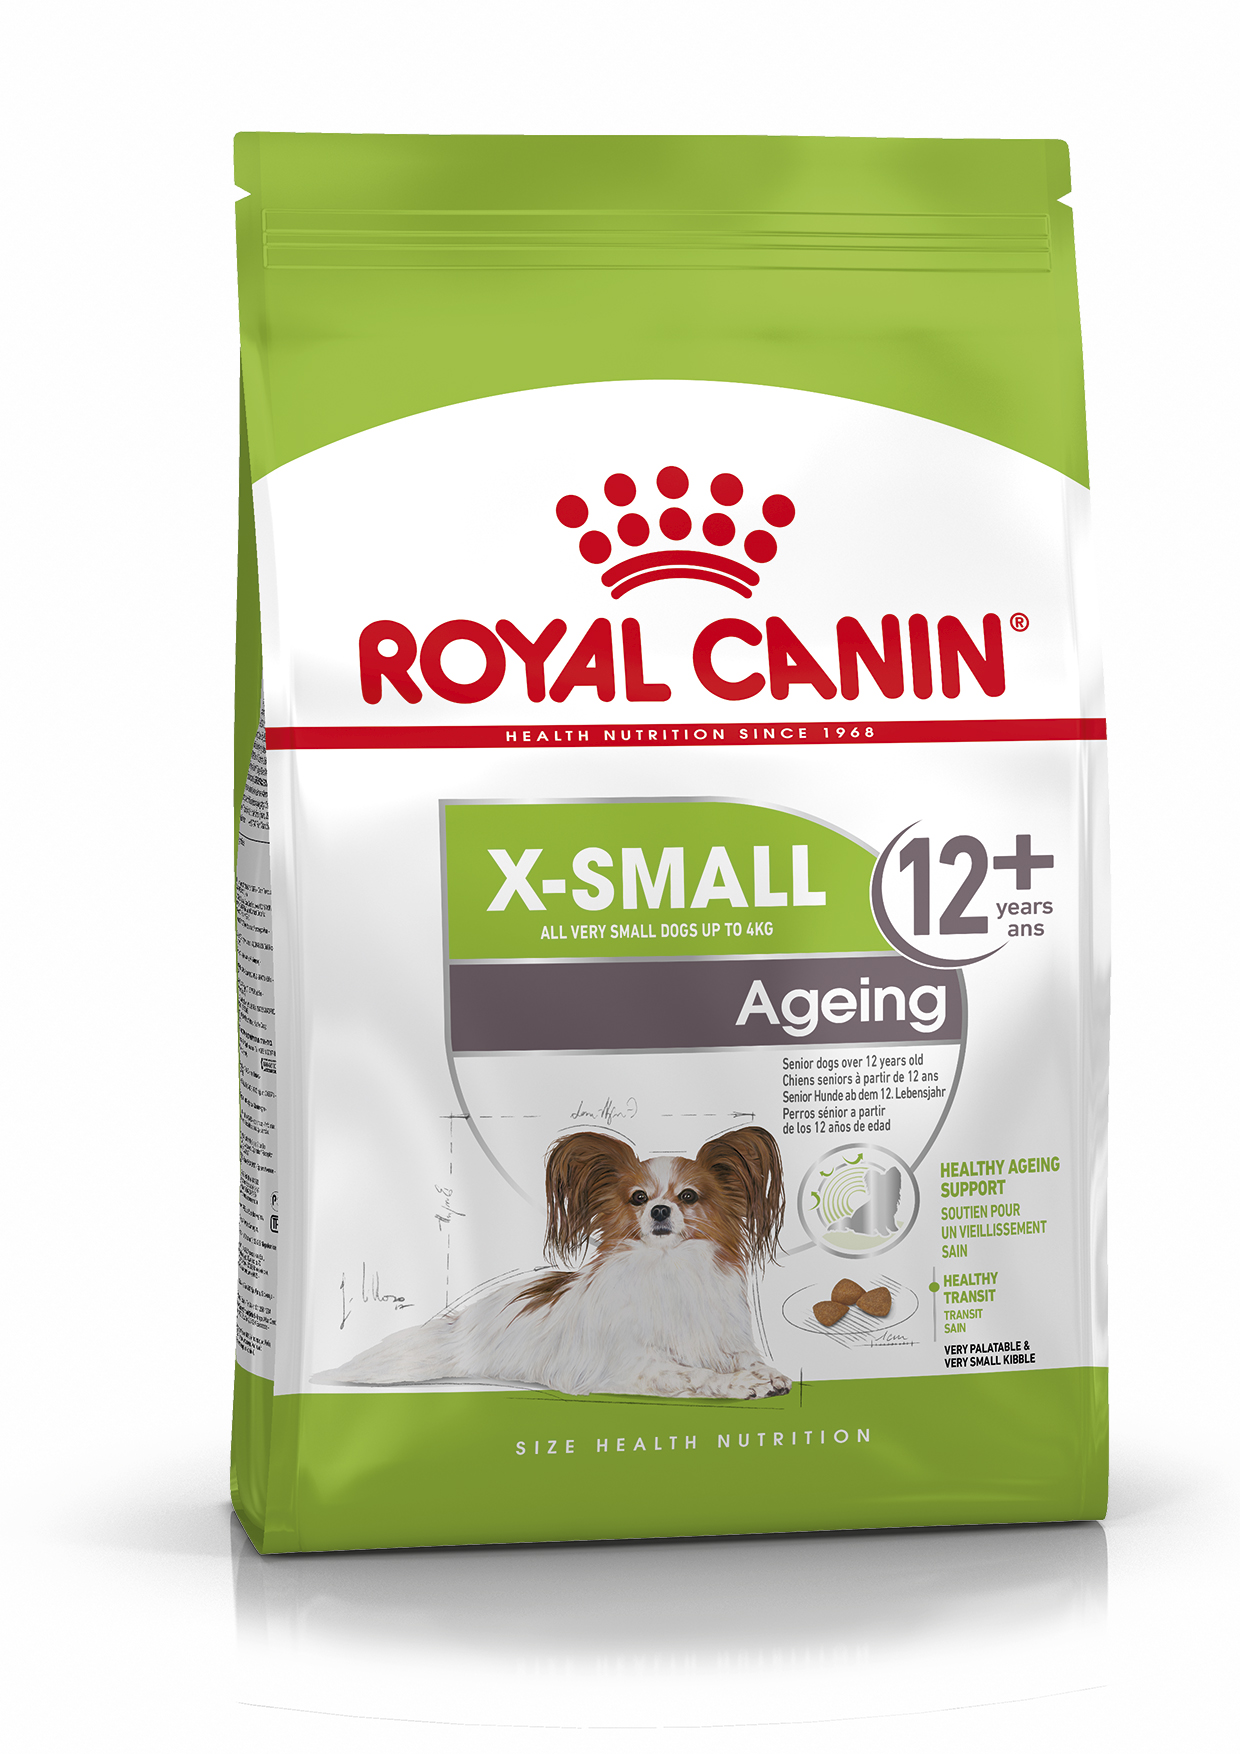 royal canin ageing 12 cat food 4kg